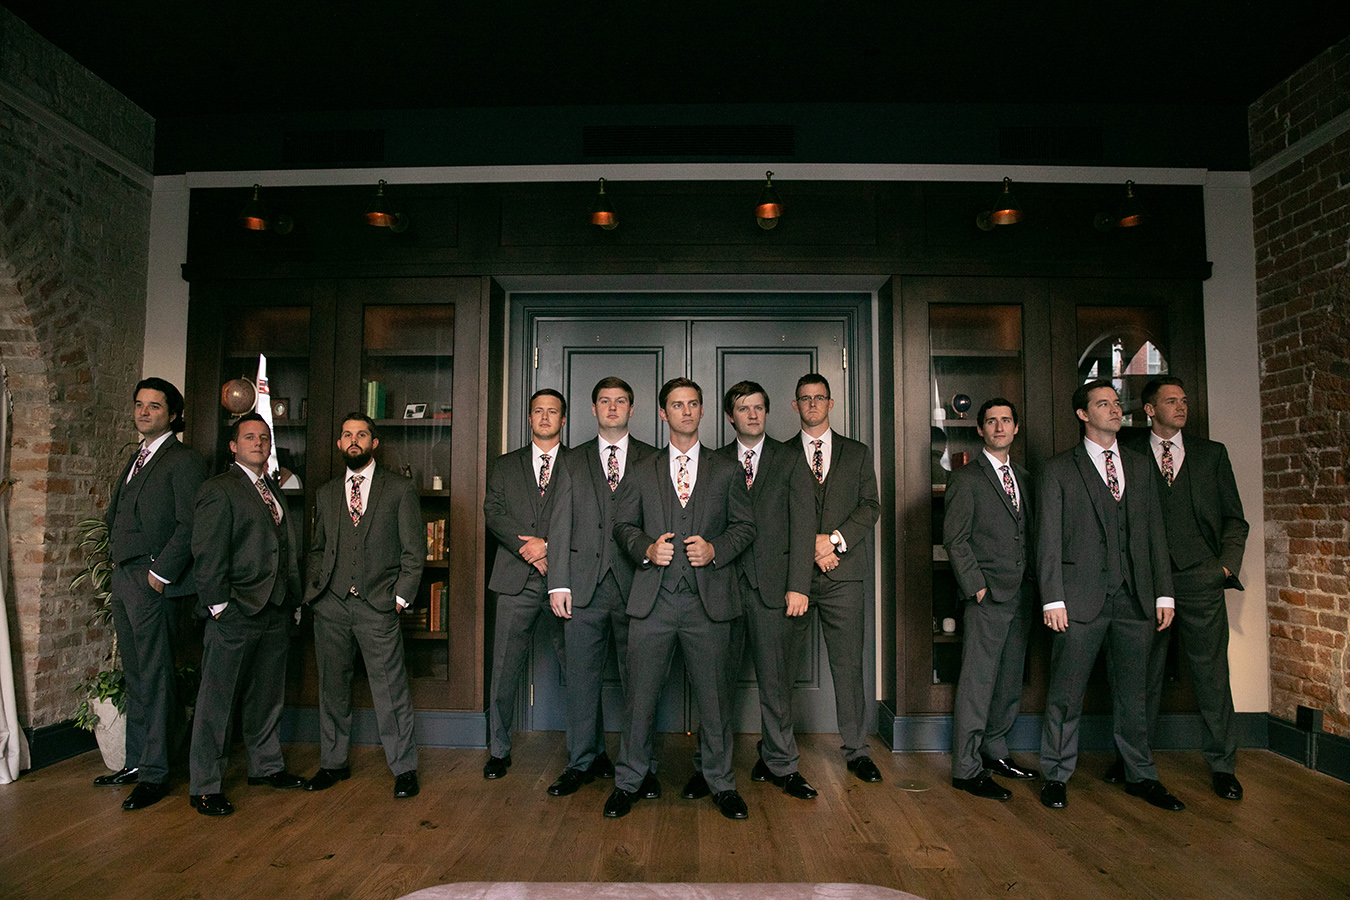 Travis and his groomsmen wore Michael Kors suits from Al's Formal Wear.